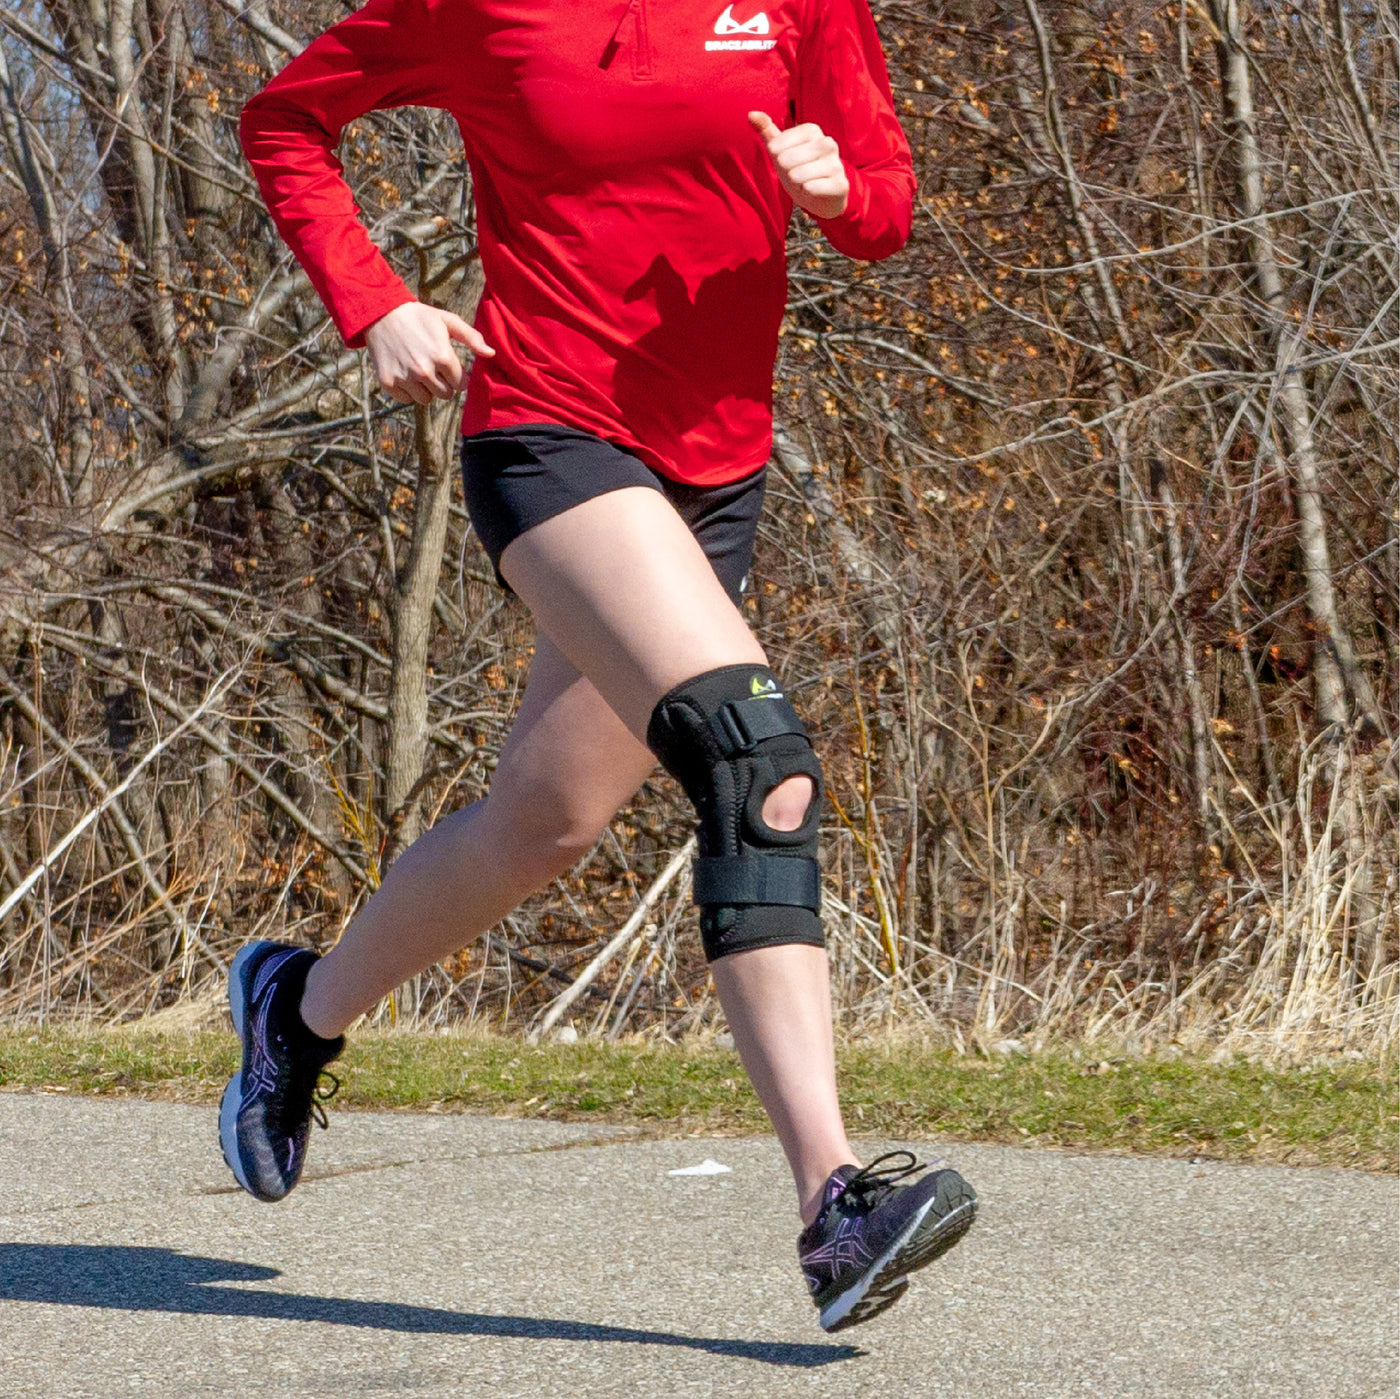 The chondromalacia patella support has stays to make running more comfortable